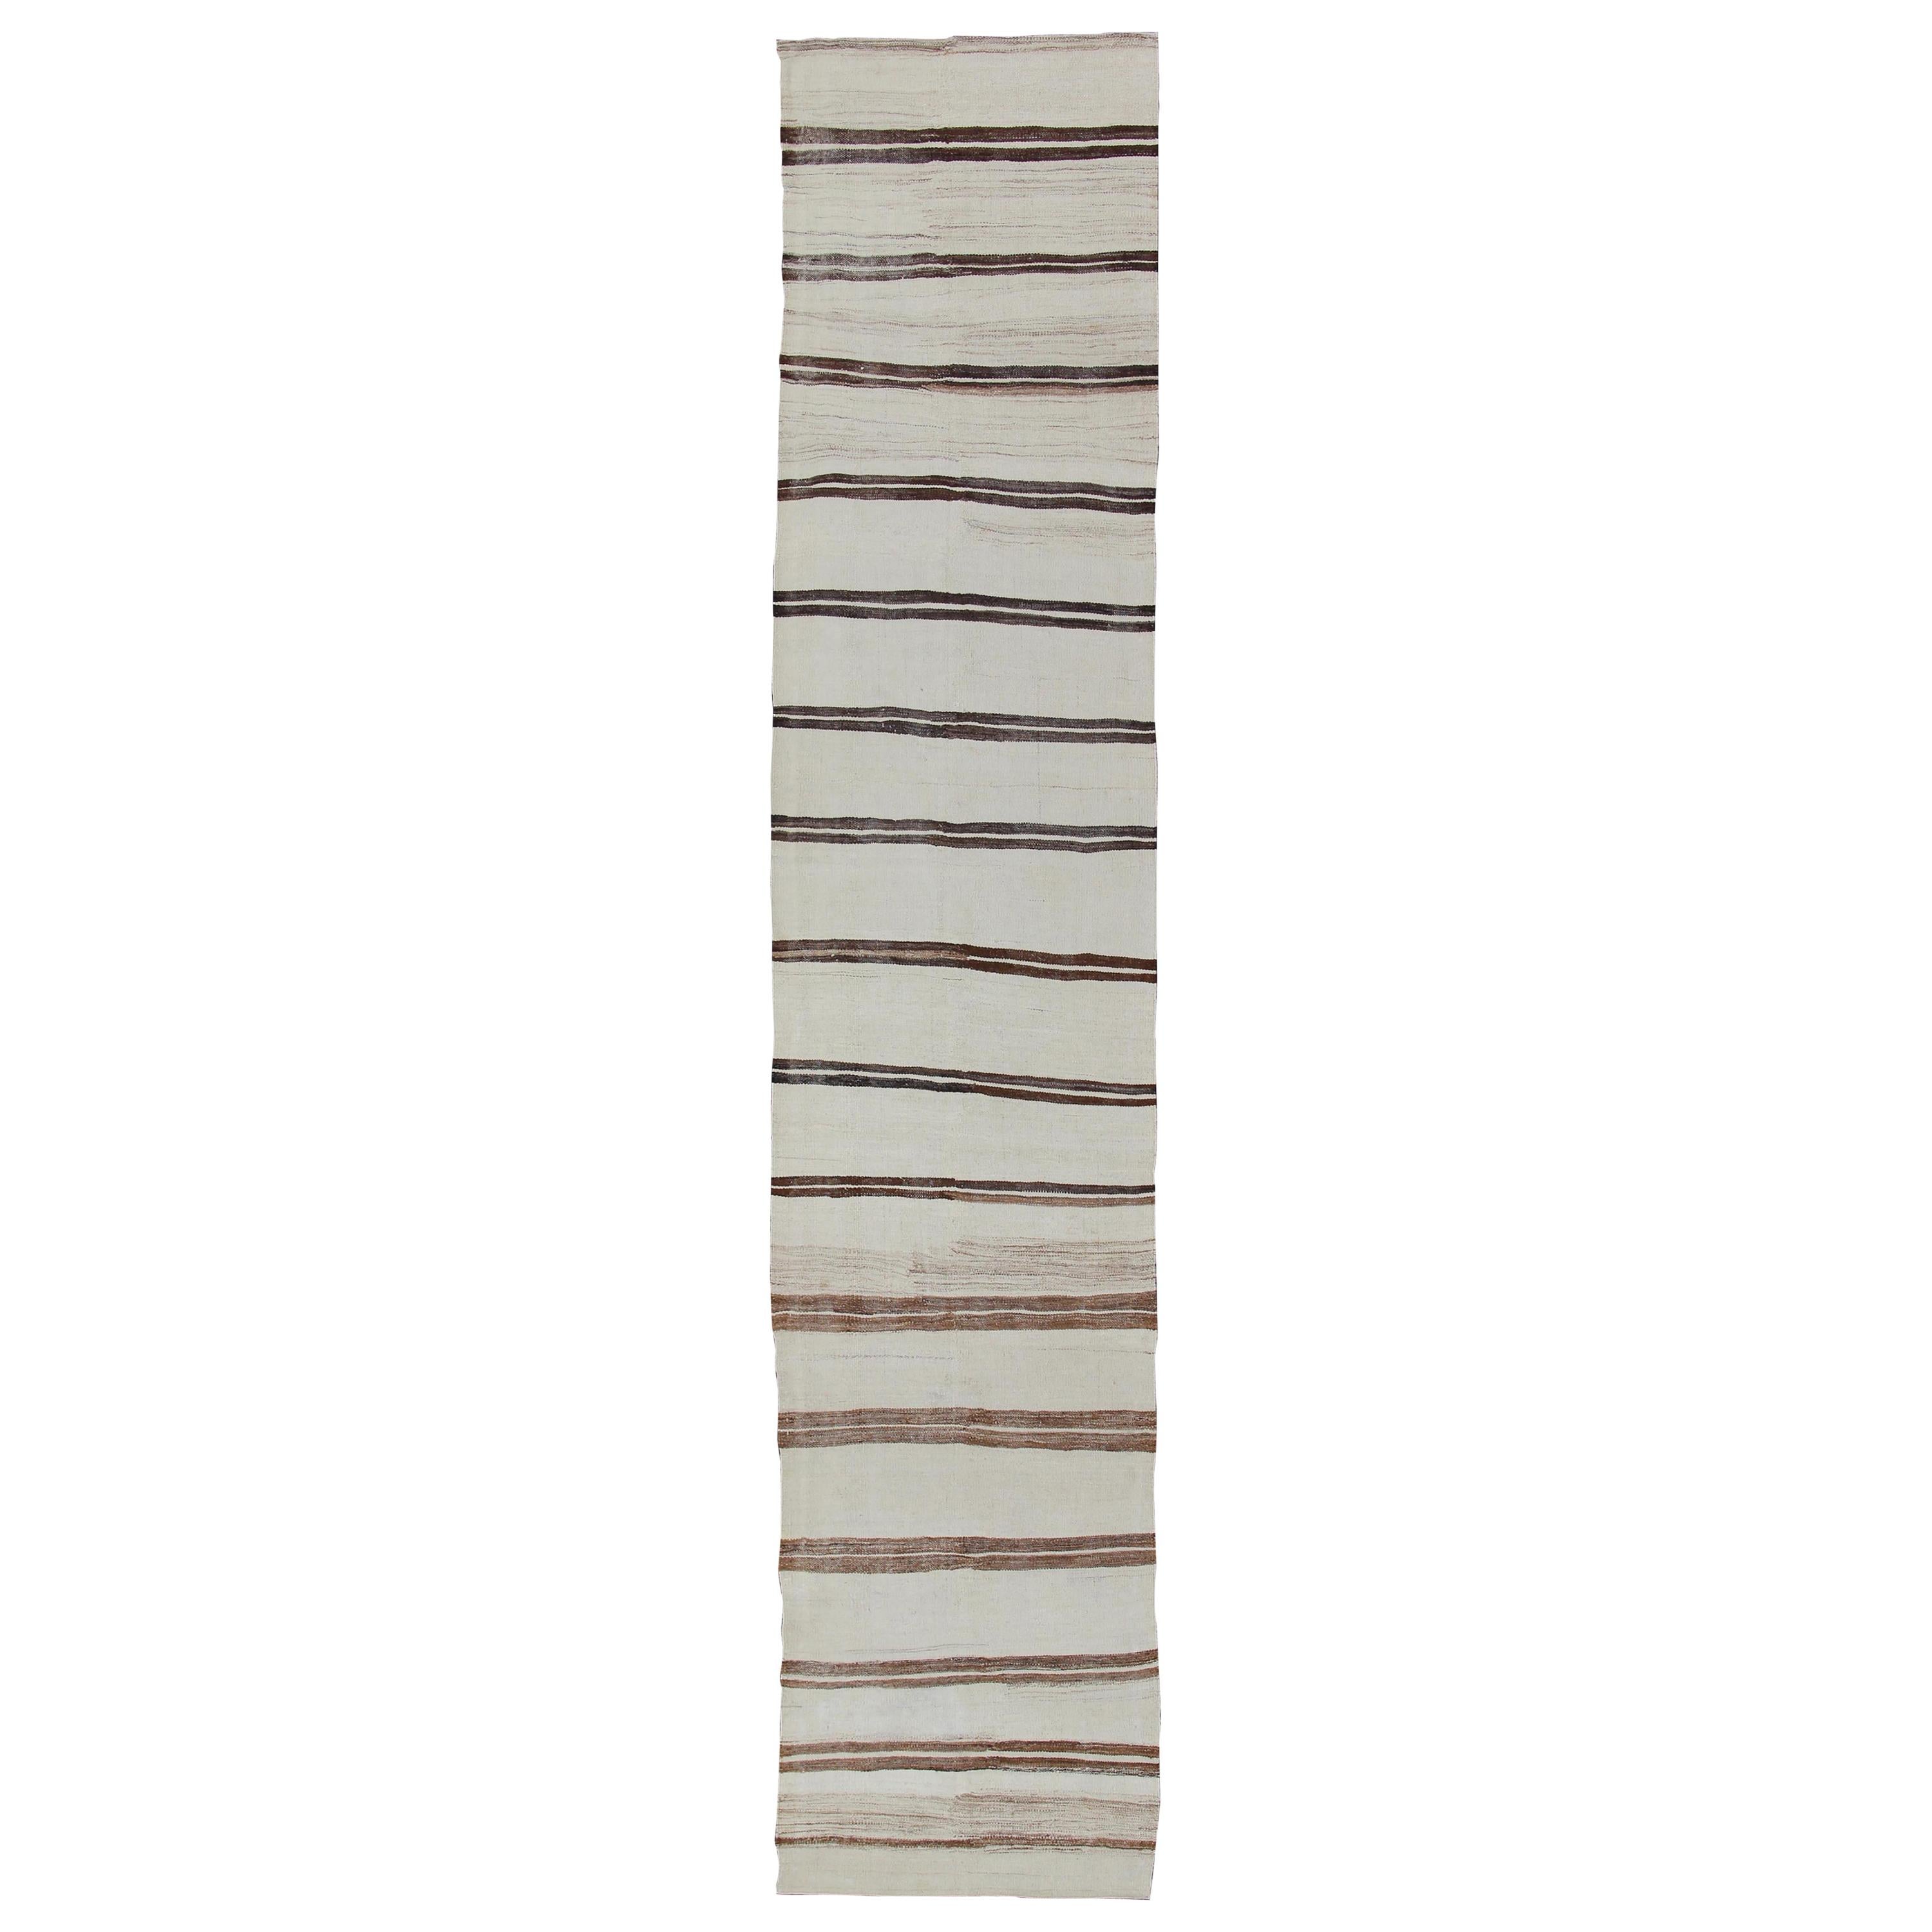 Minimalist Design Vintage Long Kilim Runner with Stripes in Brown and Ivory